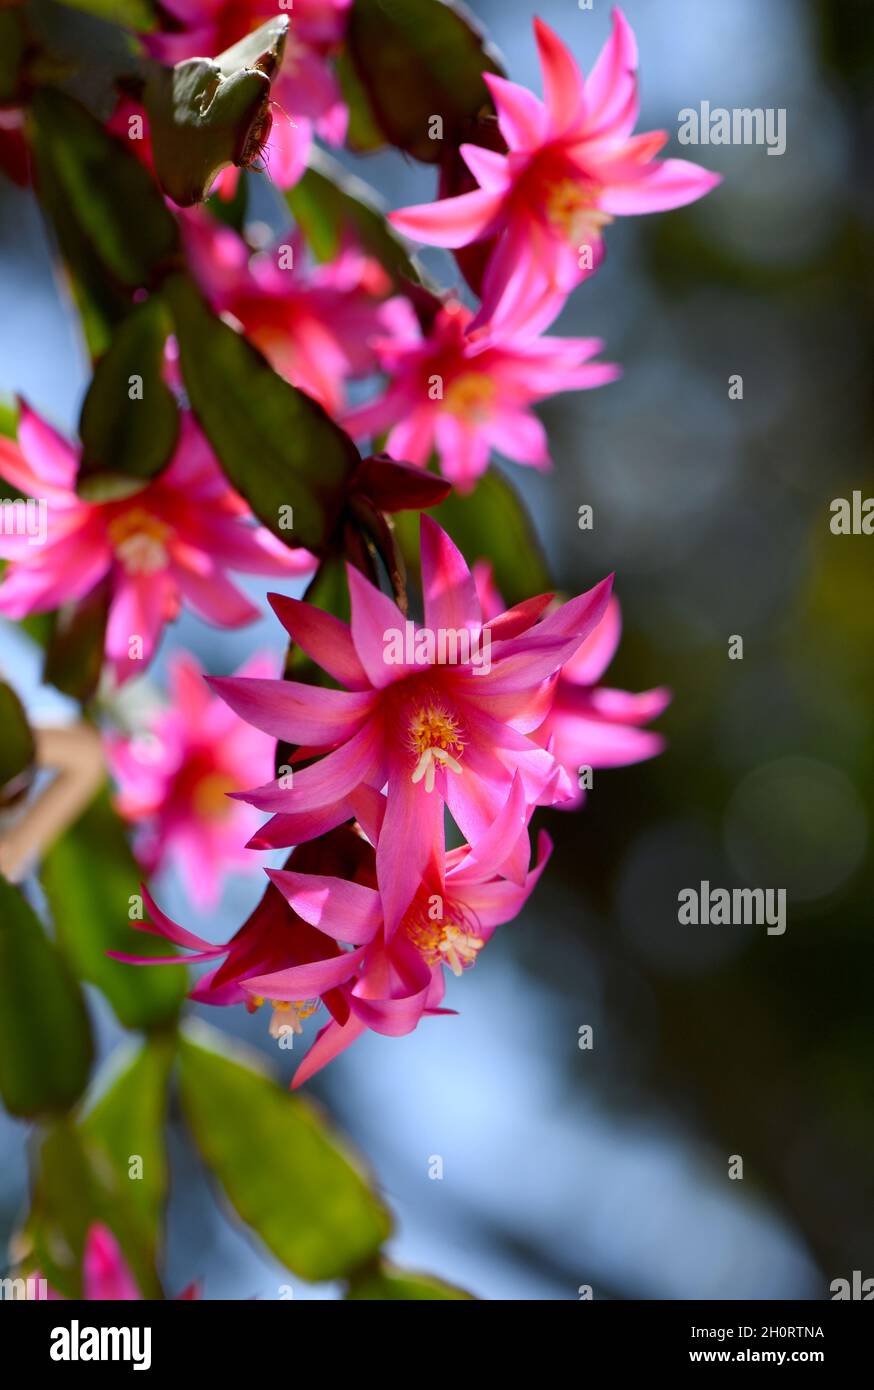 Vibrant backlit pink flowers of the Zygocactus Hatiora gaertneri, family Rhipsalideae. Also known as the Easter cactus or Whitsun Cactus Stock Photo